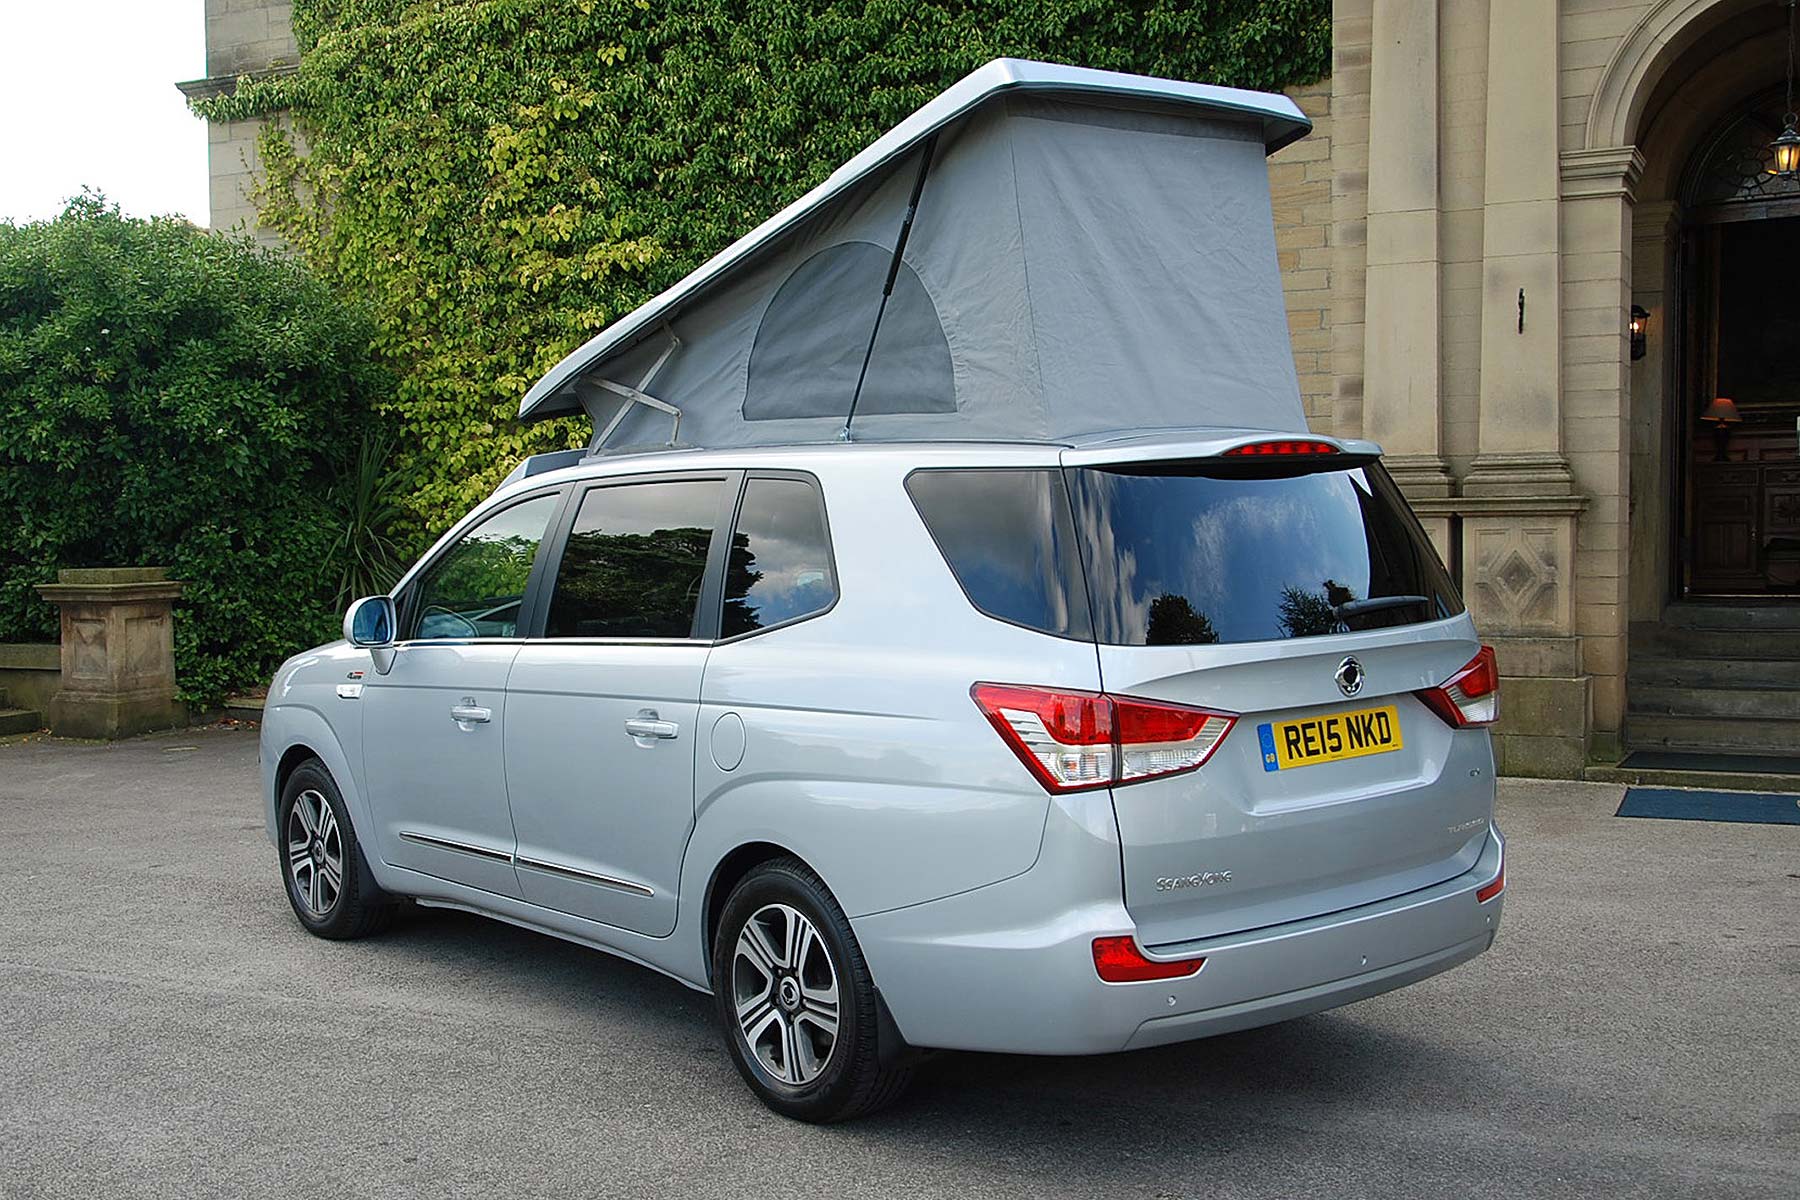 SsangYong Turismo Tourist Camper